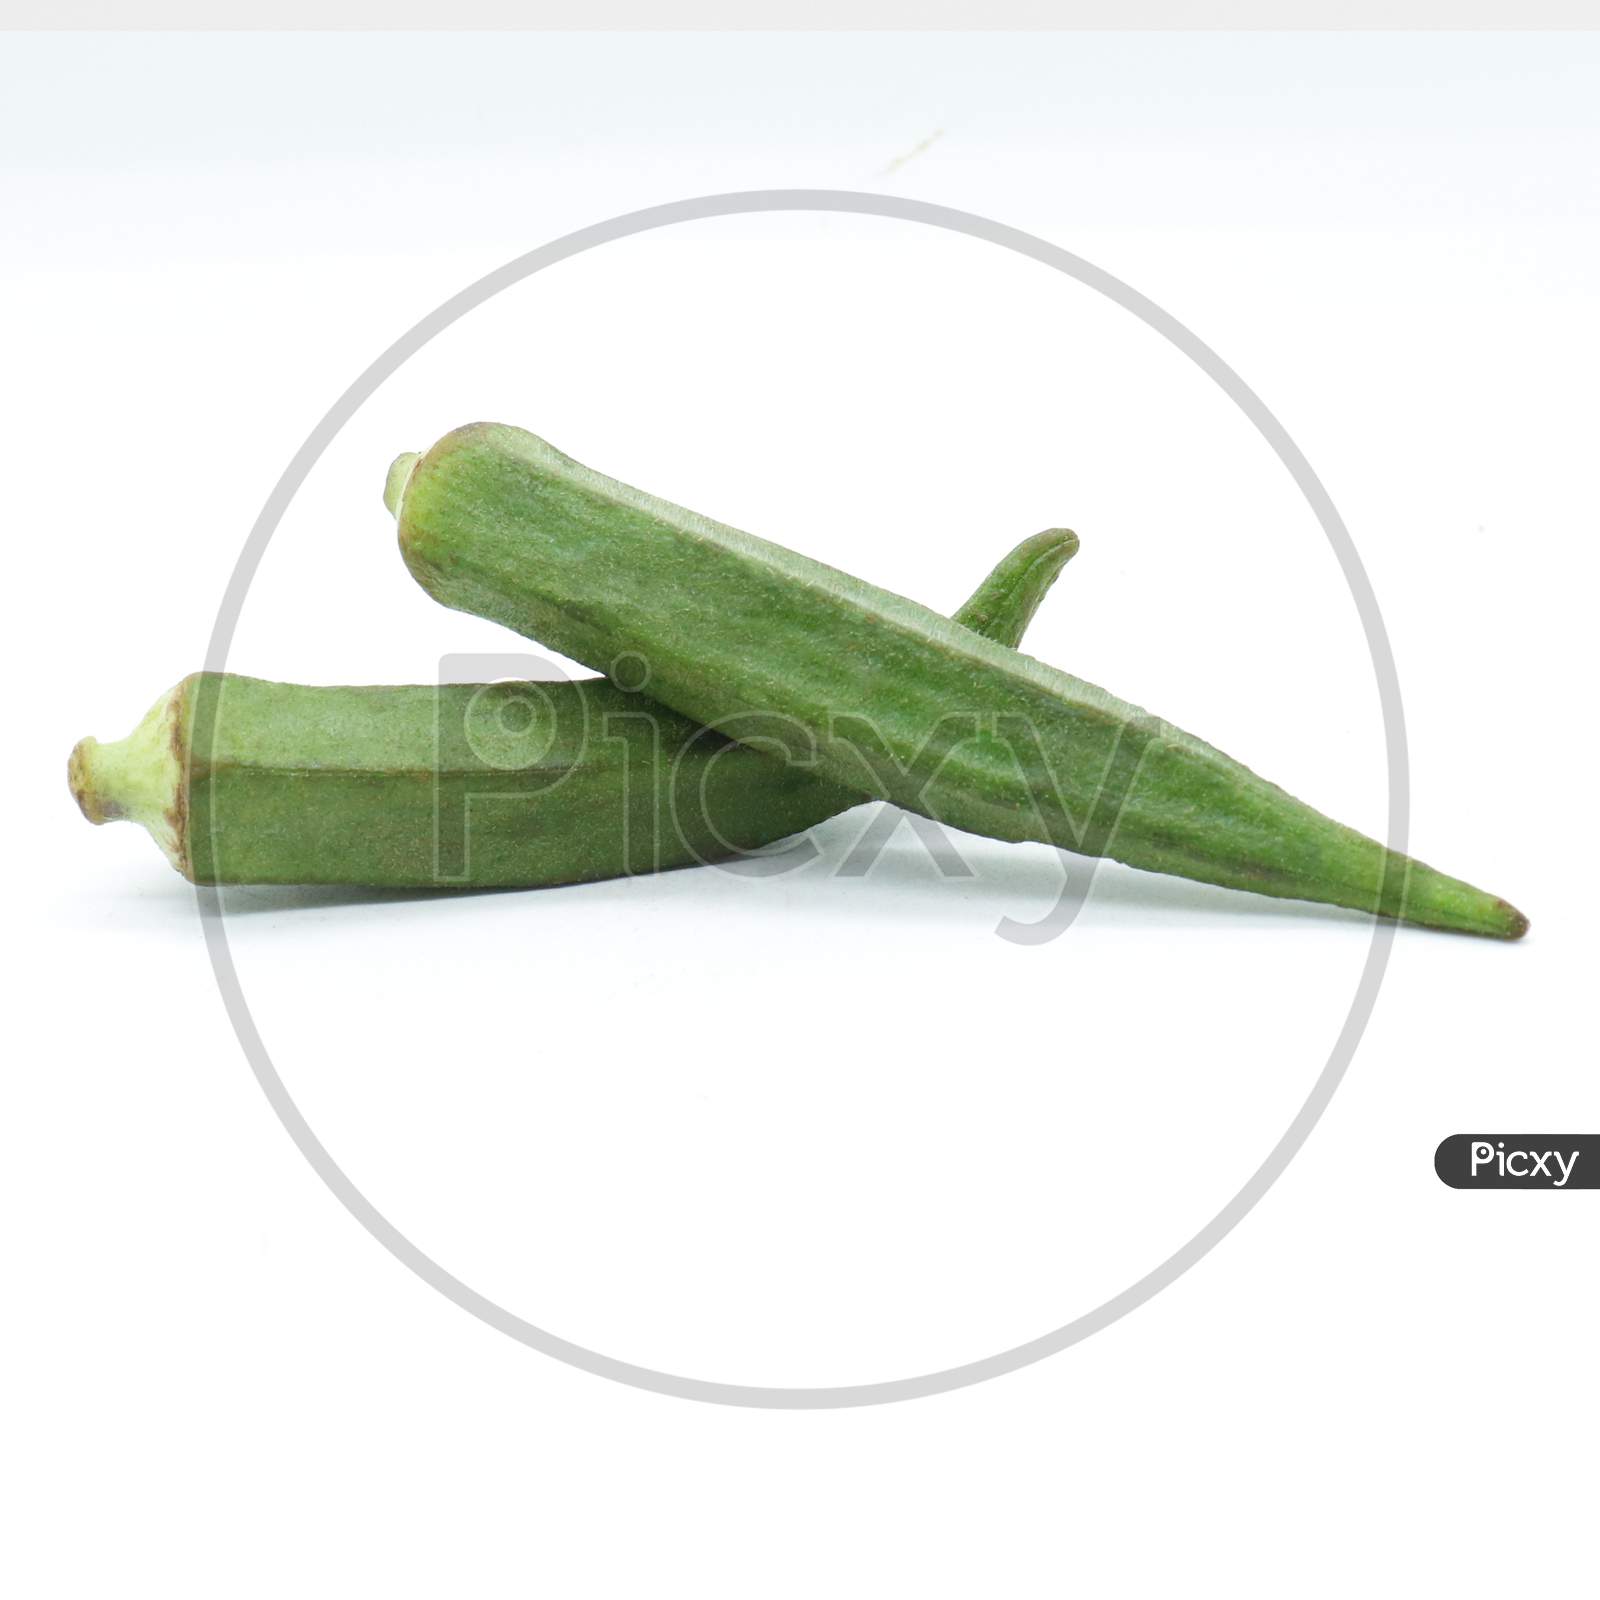 An organic and healthy okra or lady's finger on white background